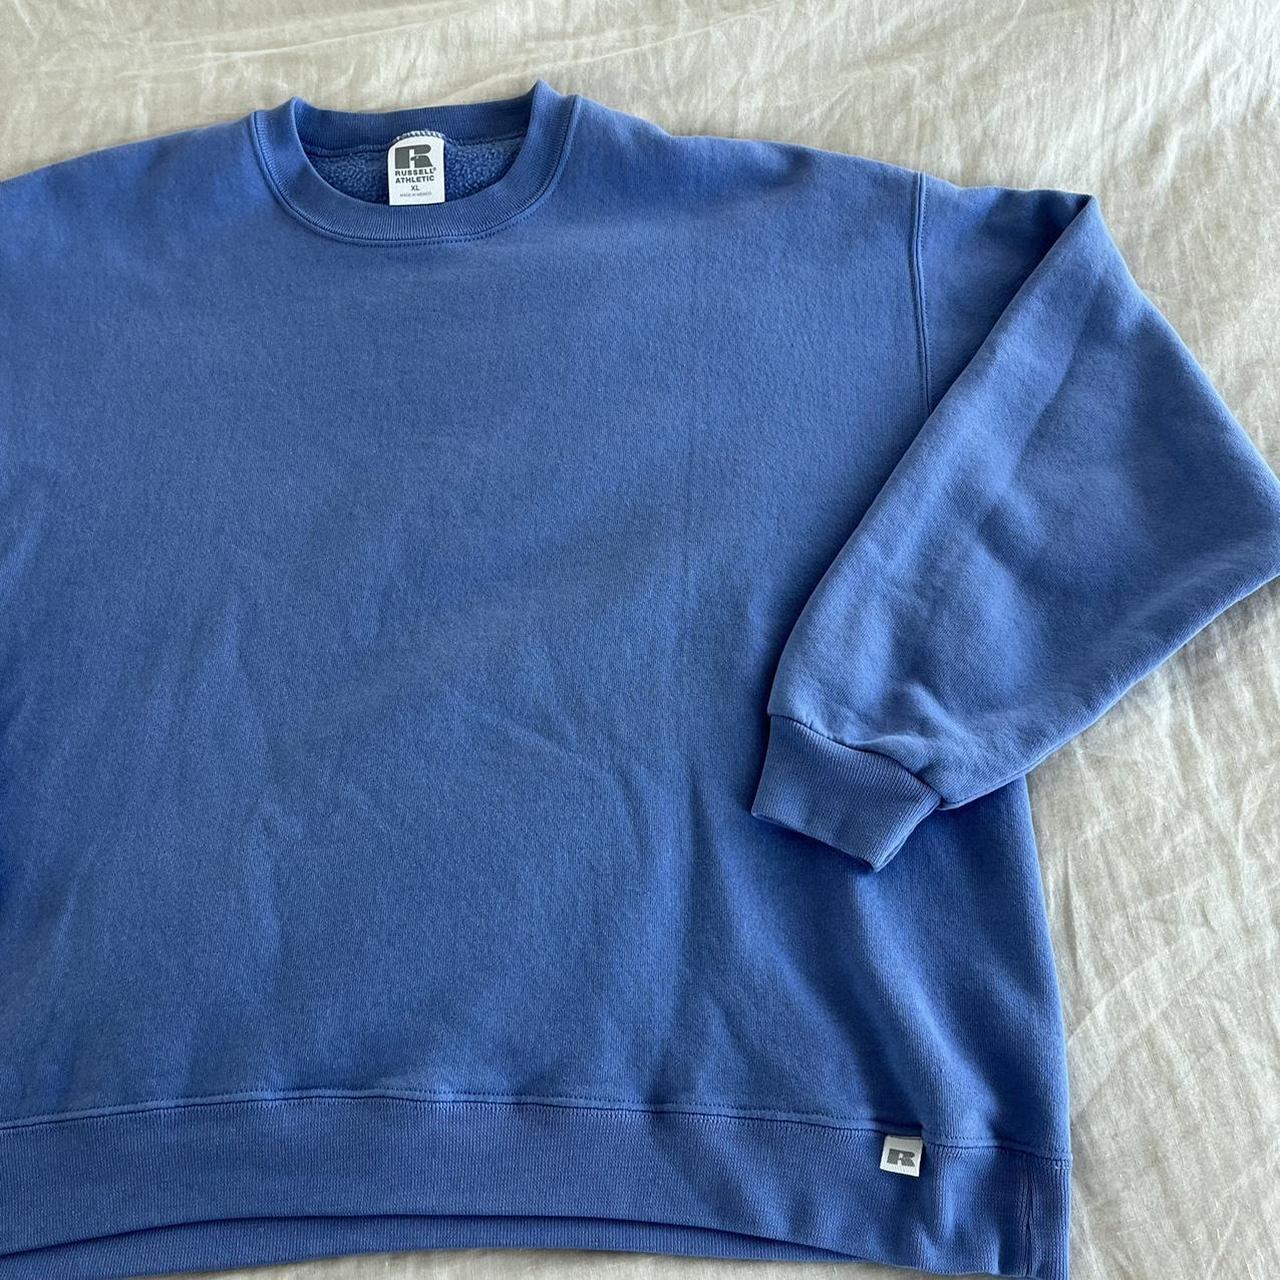 comfy blue sweater semi cropped it’s literally the... - Depop